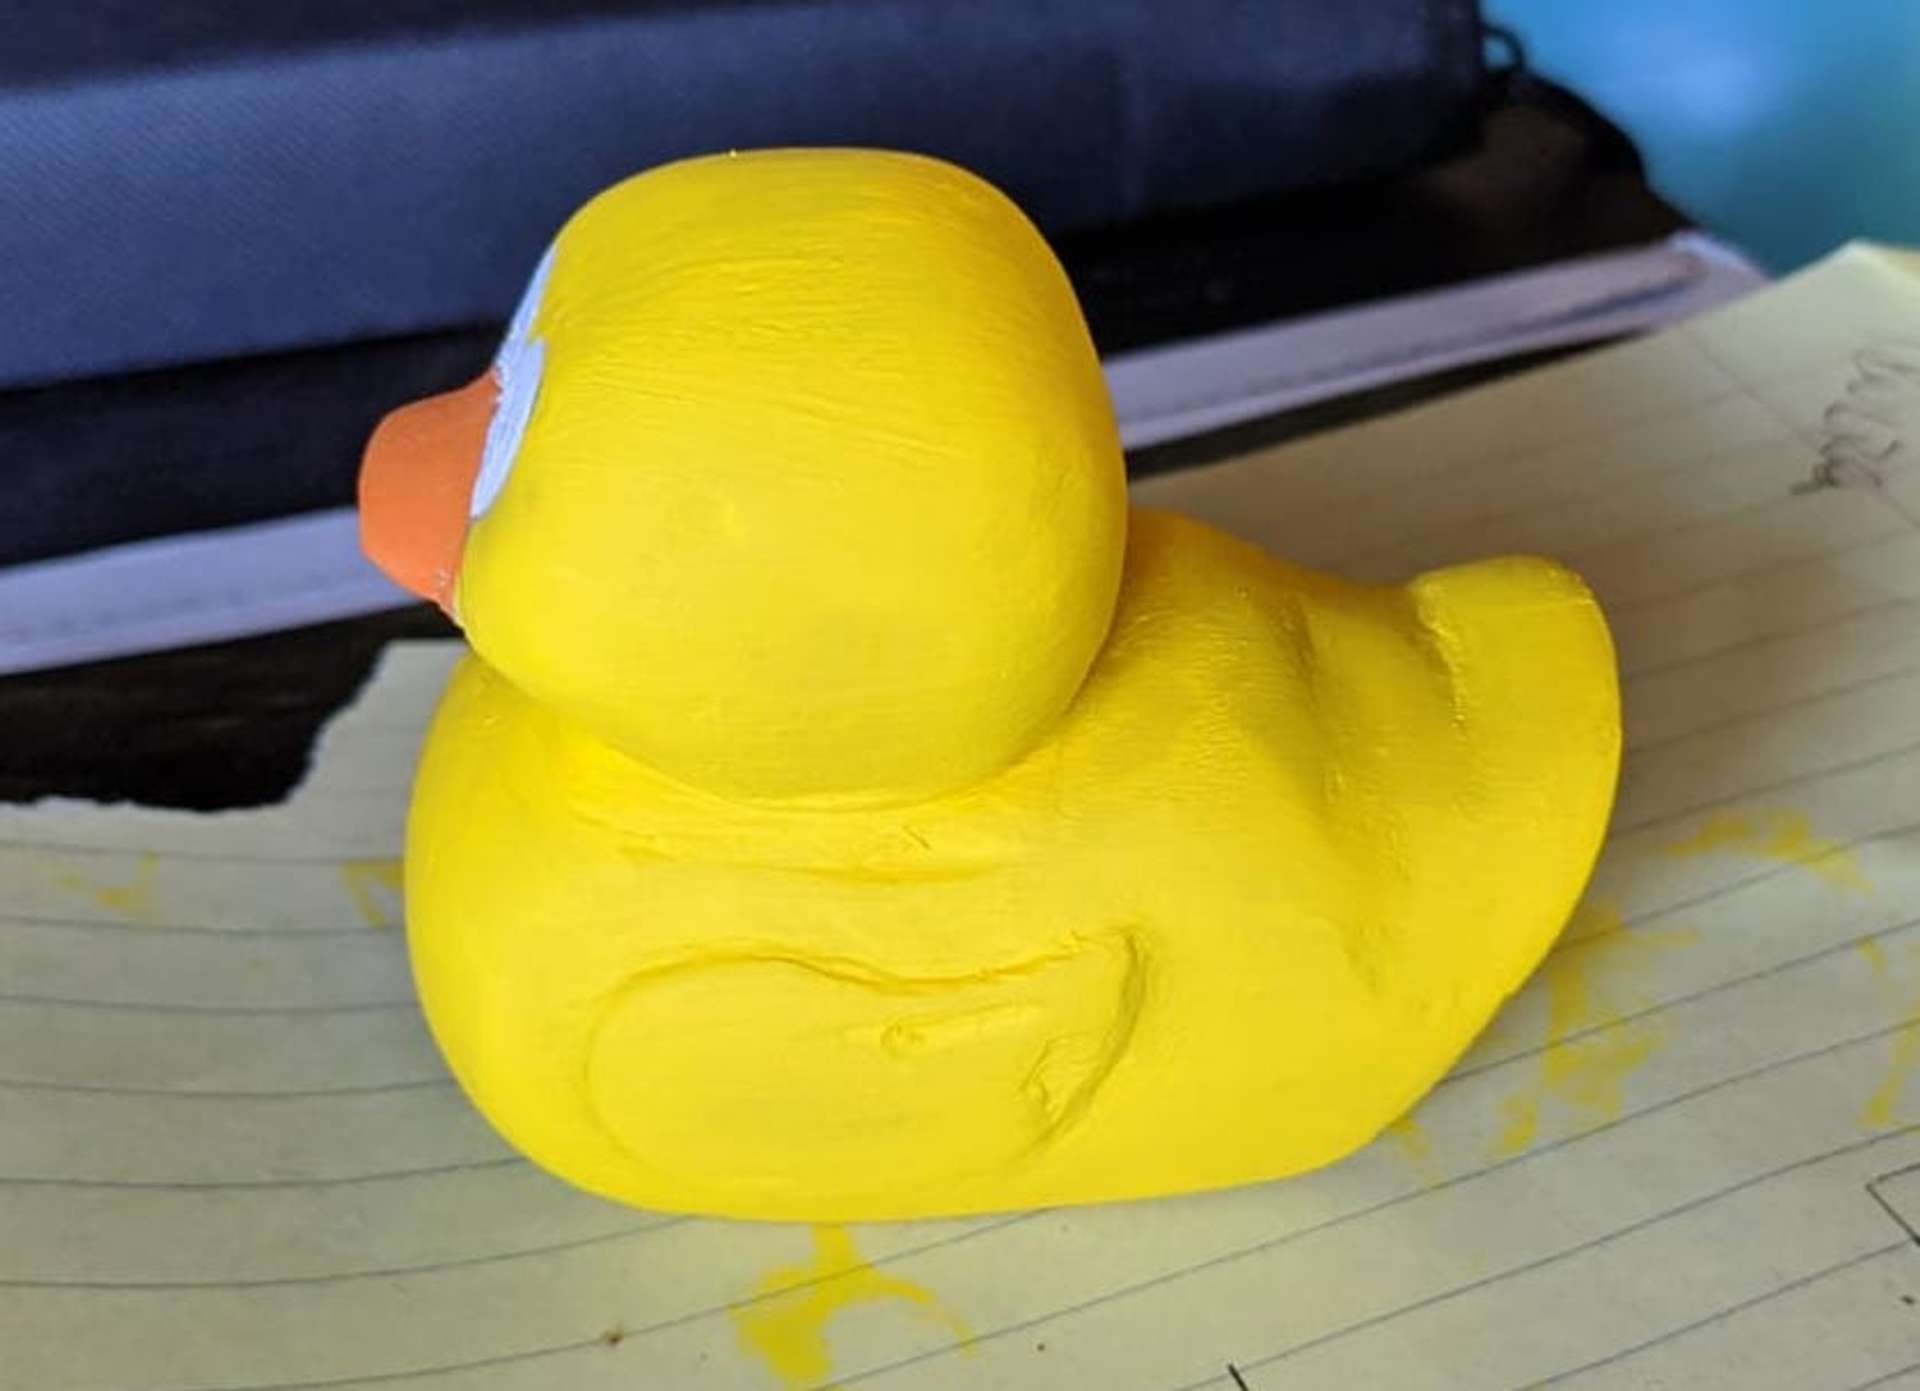 A "rubber duck" made of wood